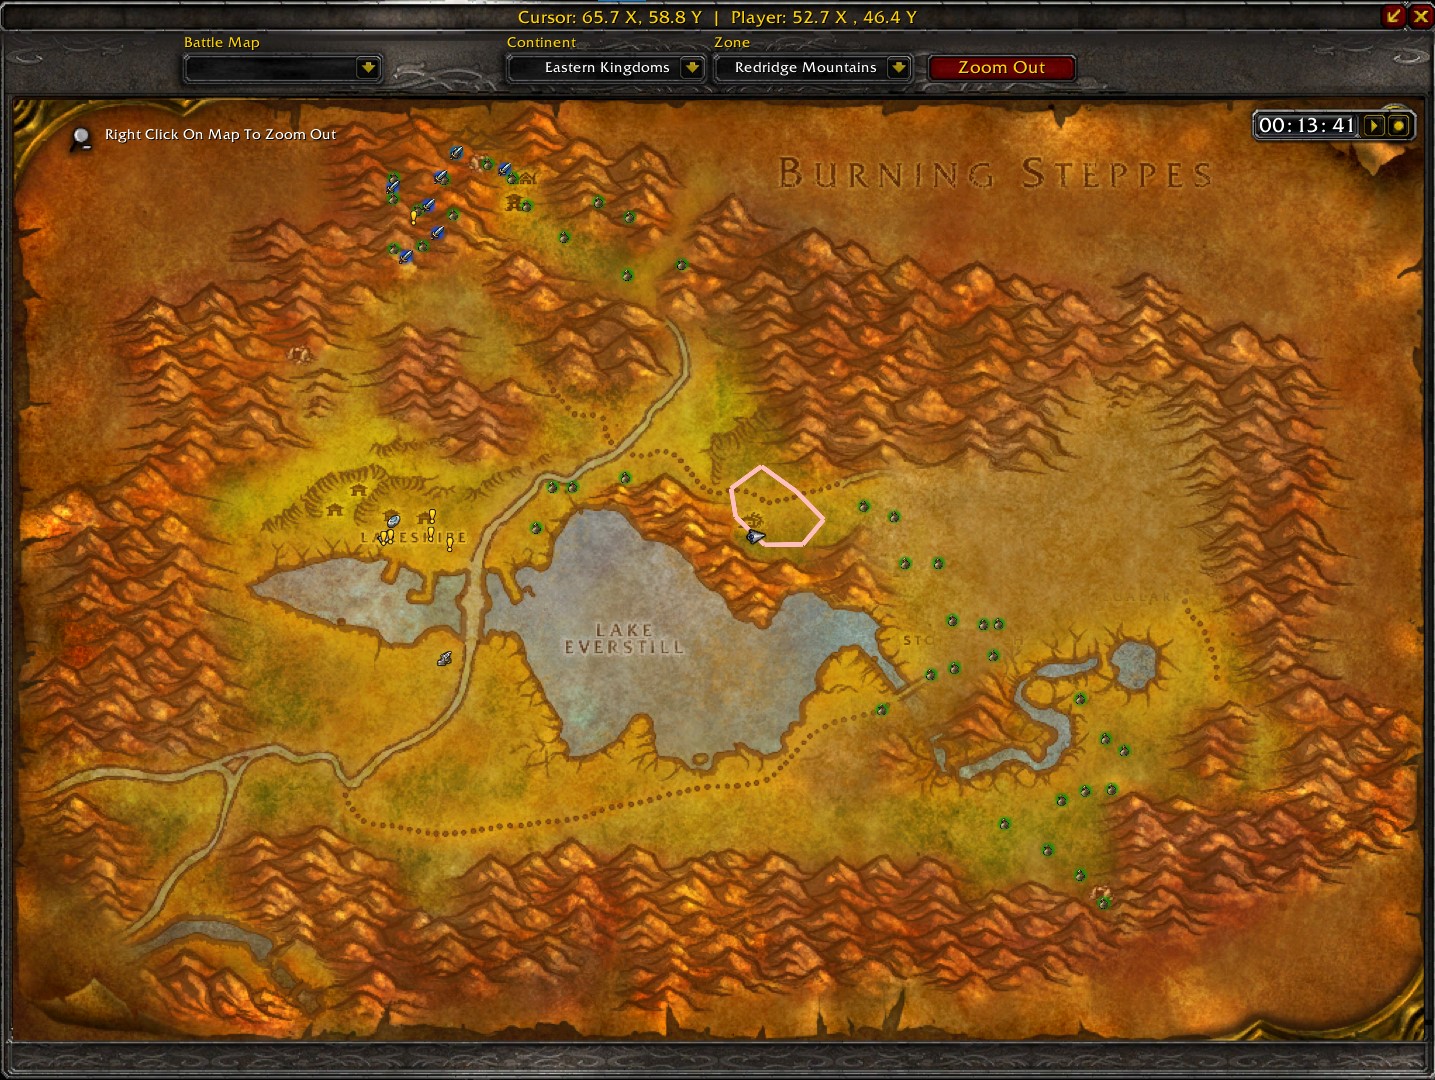 Map of Redridge Mountains showcasing a spider silk farming route with key locations marked.